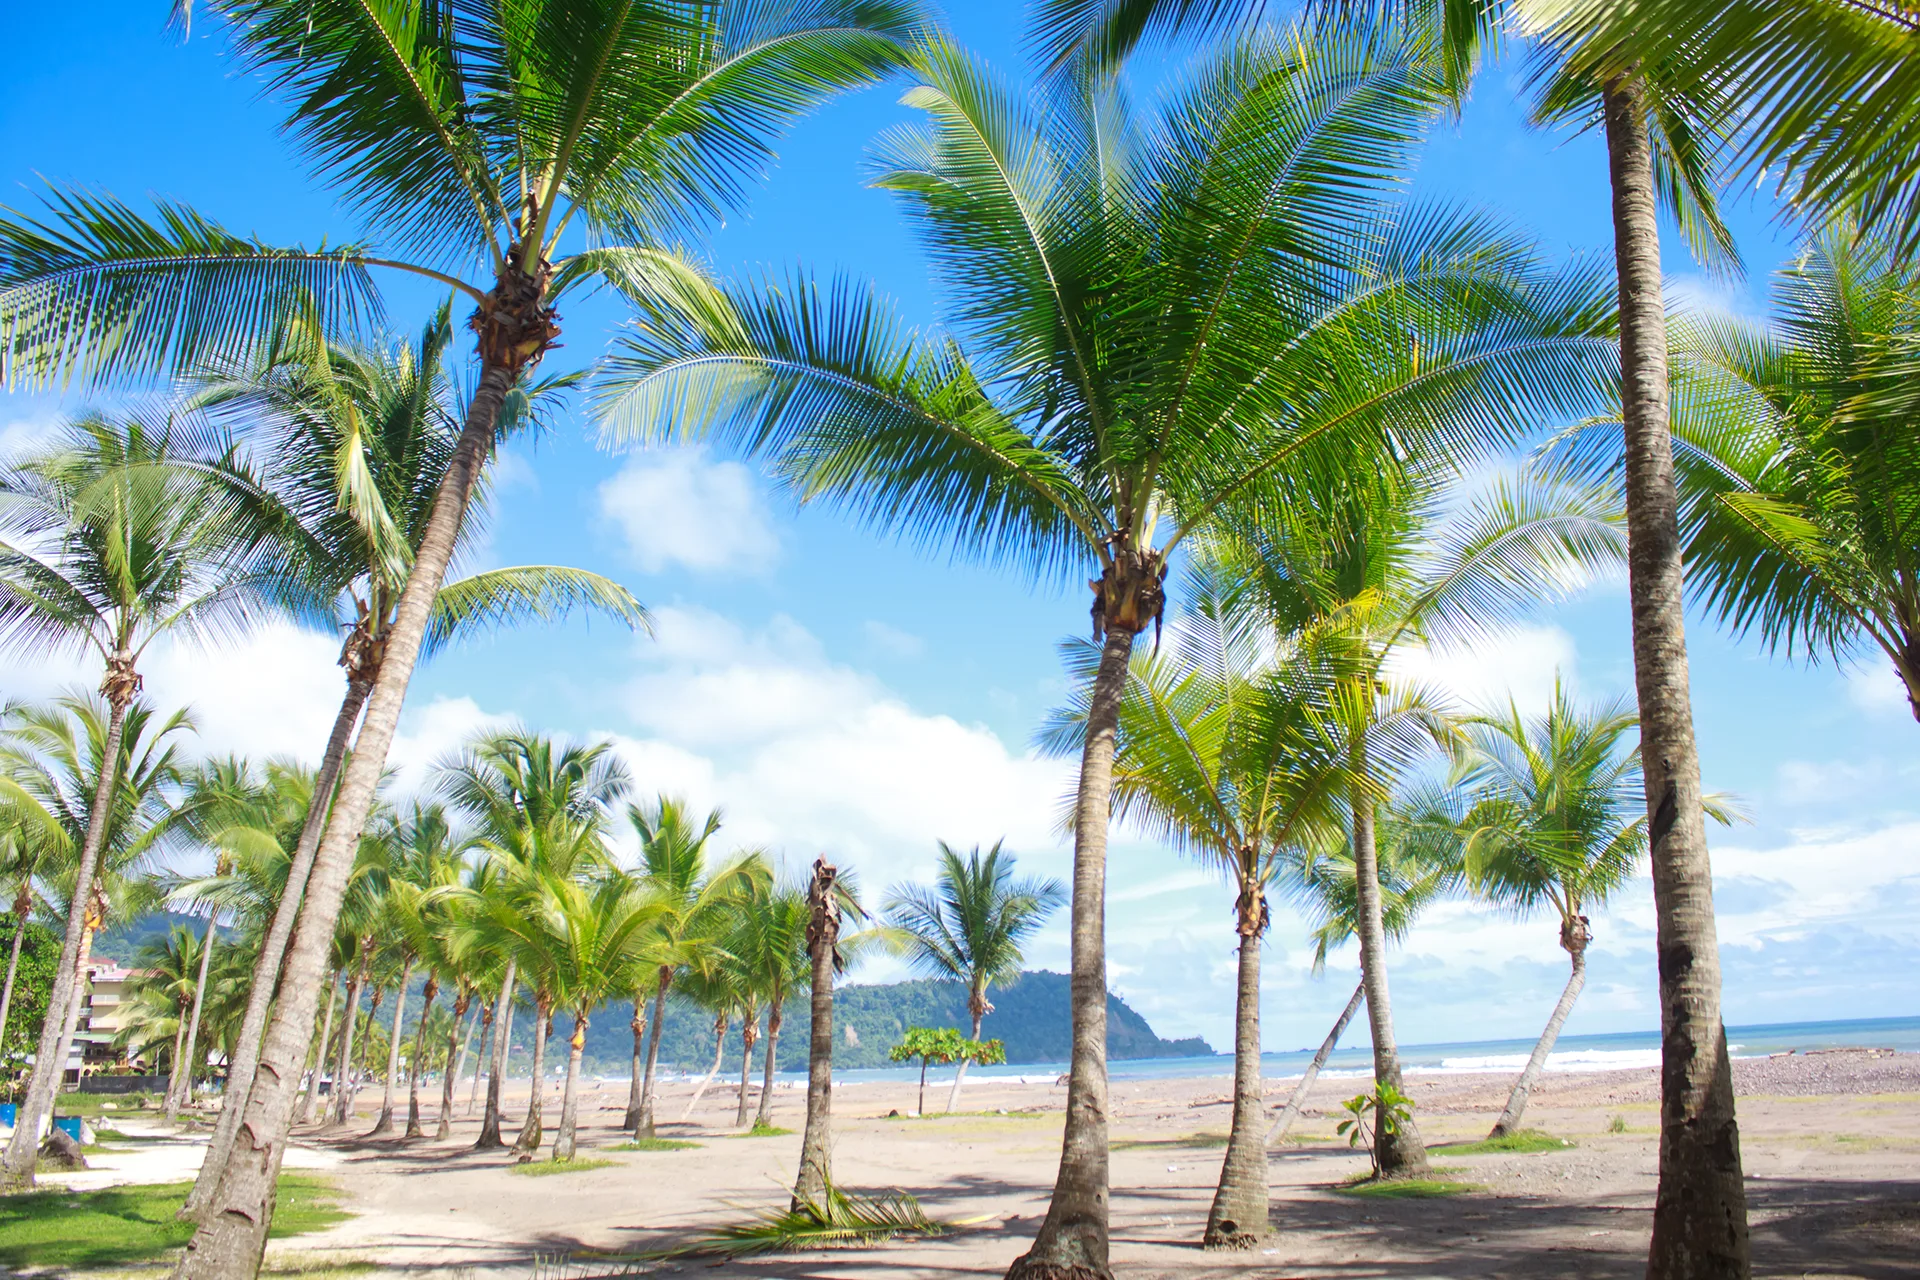 tropical-beach-with-palm-trees-in-jaco-costa-rica-SBI-317297702 copy